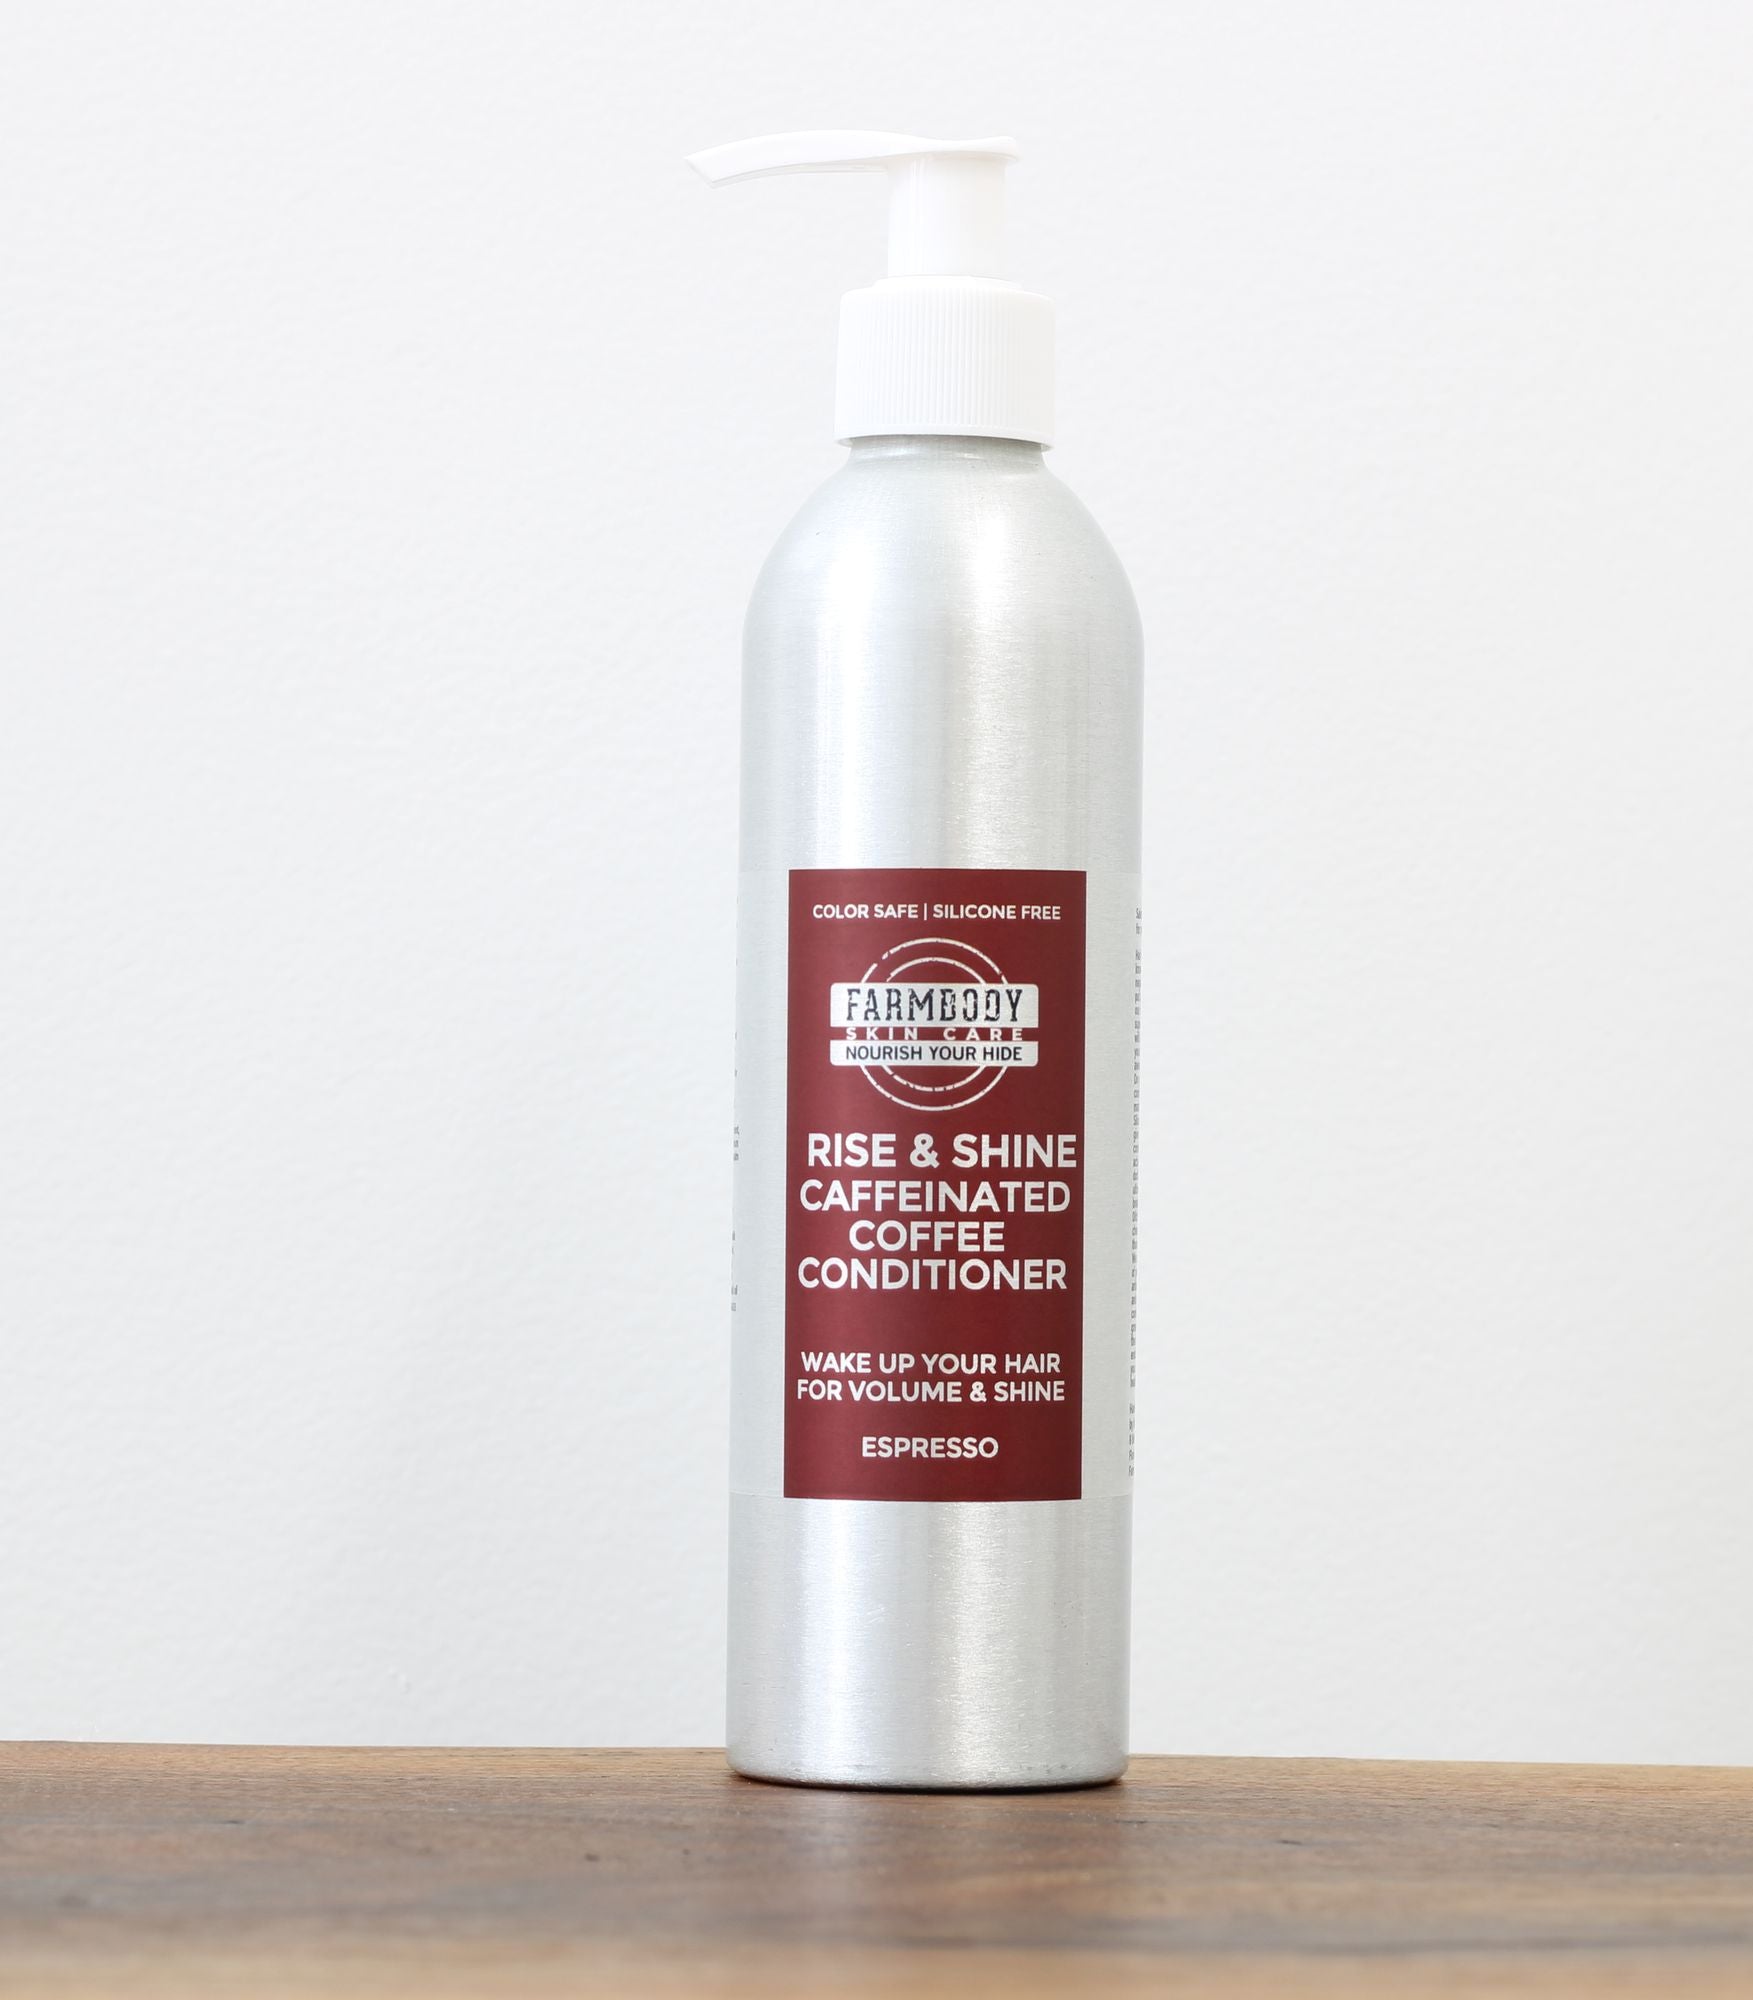 Farmbody Caffeinated Coffee Conditioner for Hair Growth Silicone Free for Sensitive Scalps